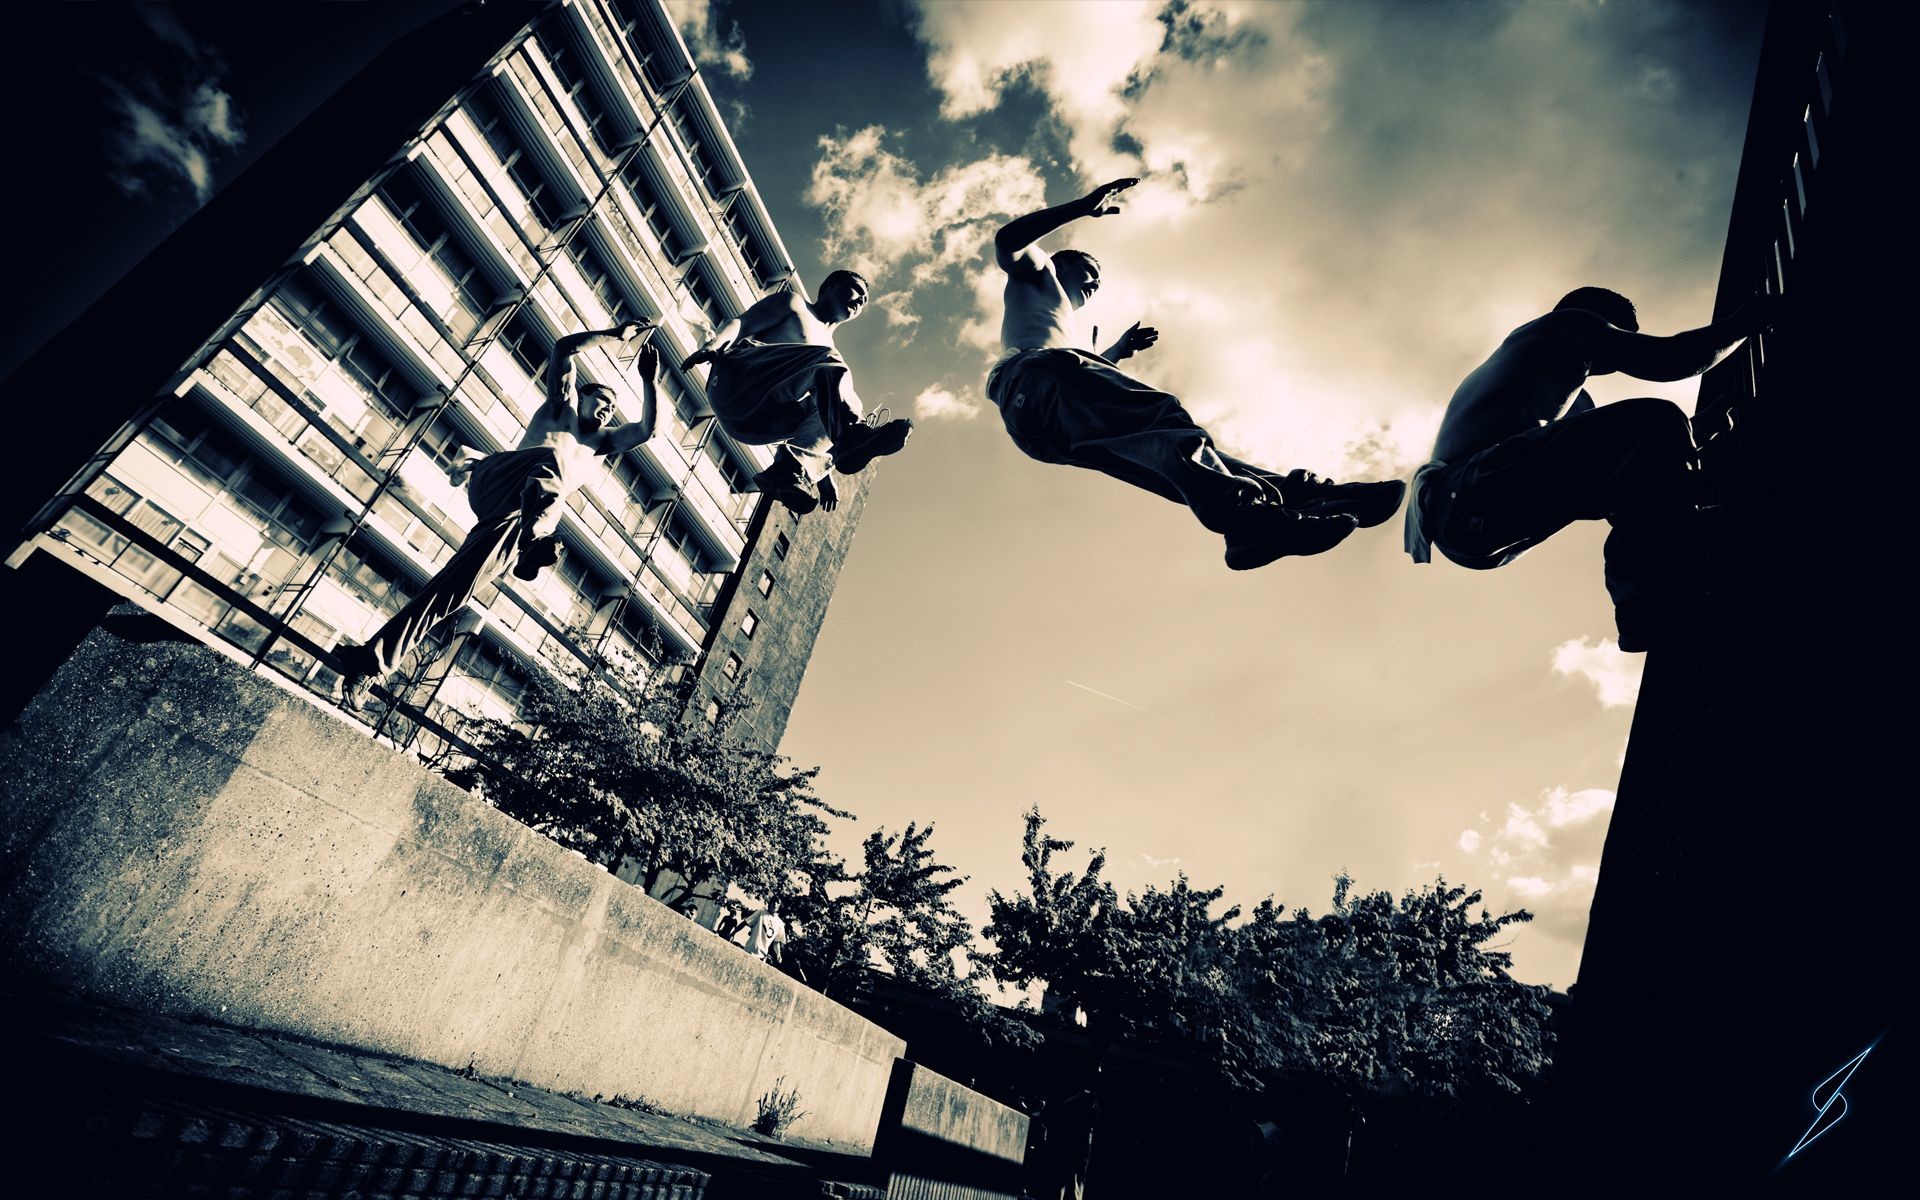 1920x1200, Download Parkour Free Running Wallpapers - Parkour Wallpaper Hd  - 1920x1200 Wallpaper 